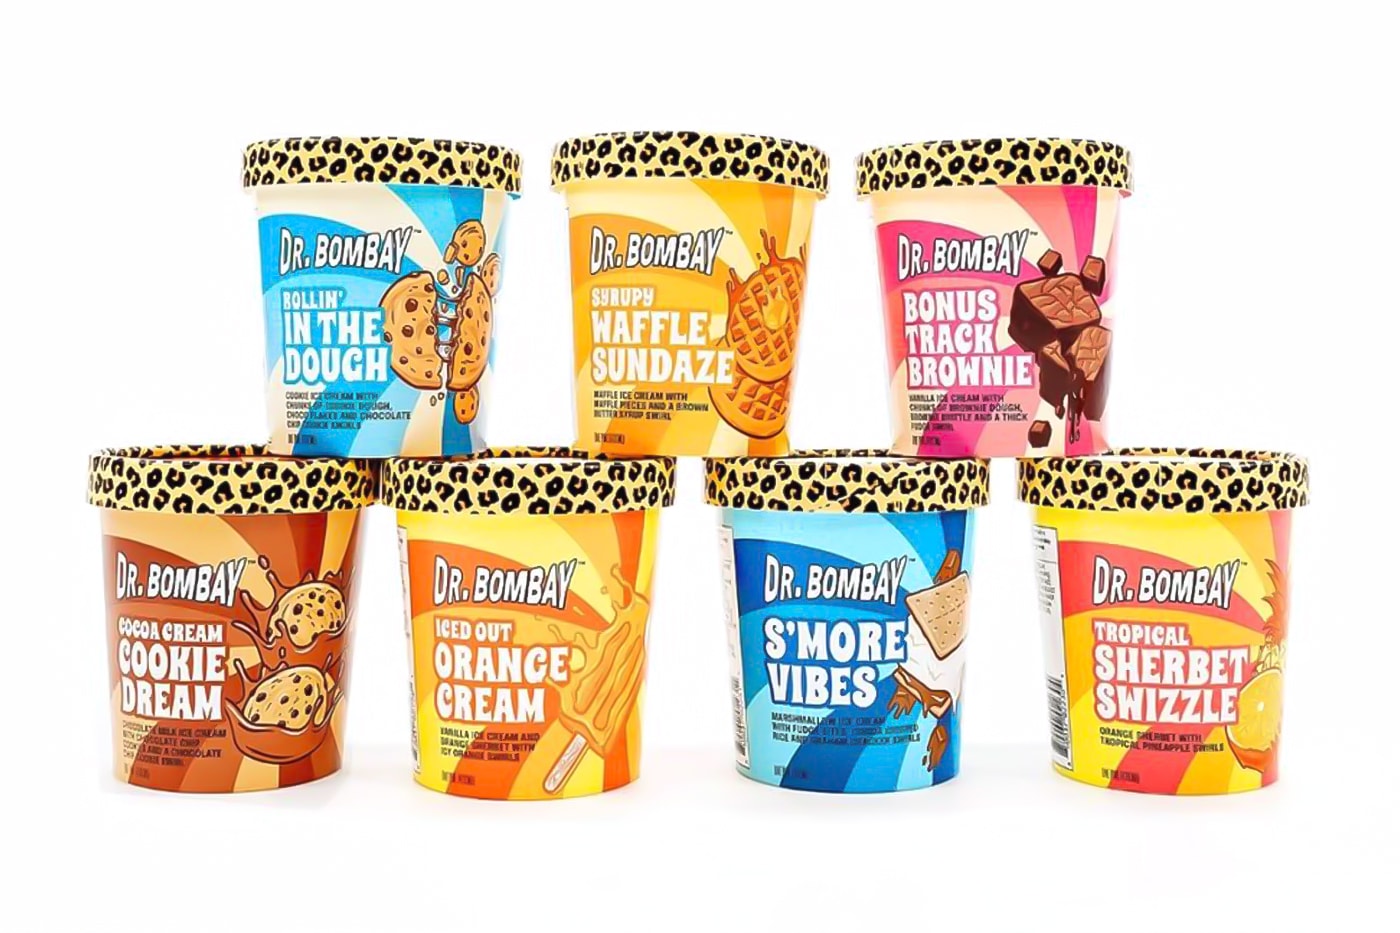 Snoop Dogg Drops Seven New Ice Cream Flavors dr bombay ice cream nft bored ape happi co bosslady foods smore vibes rolling in the dough bonus track brownie cookie dream iced out orange swizzle sherbet 